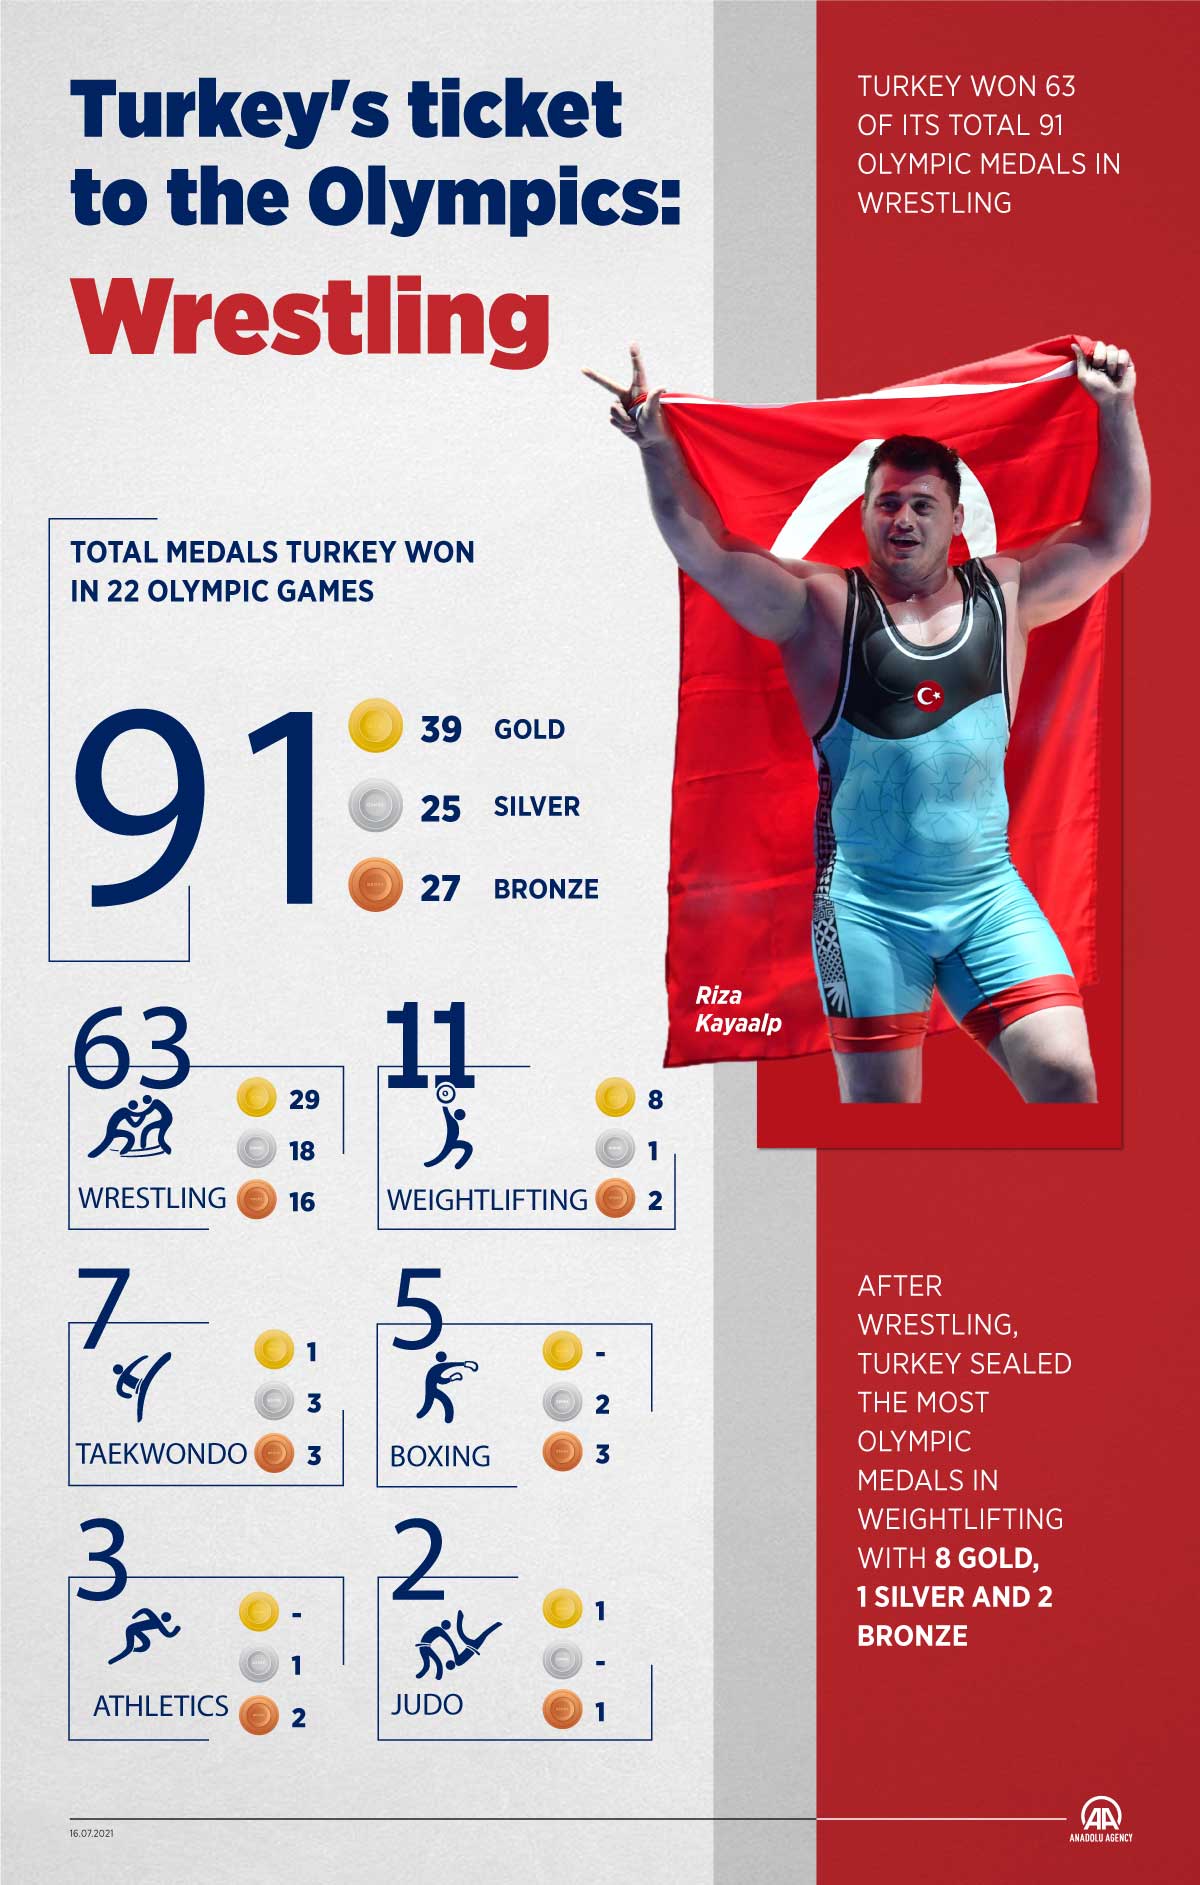  Turkey's ticket to the Olympics: Wrestling